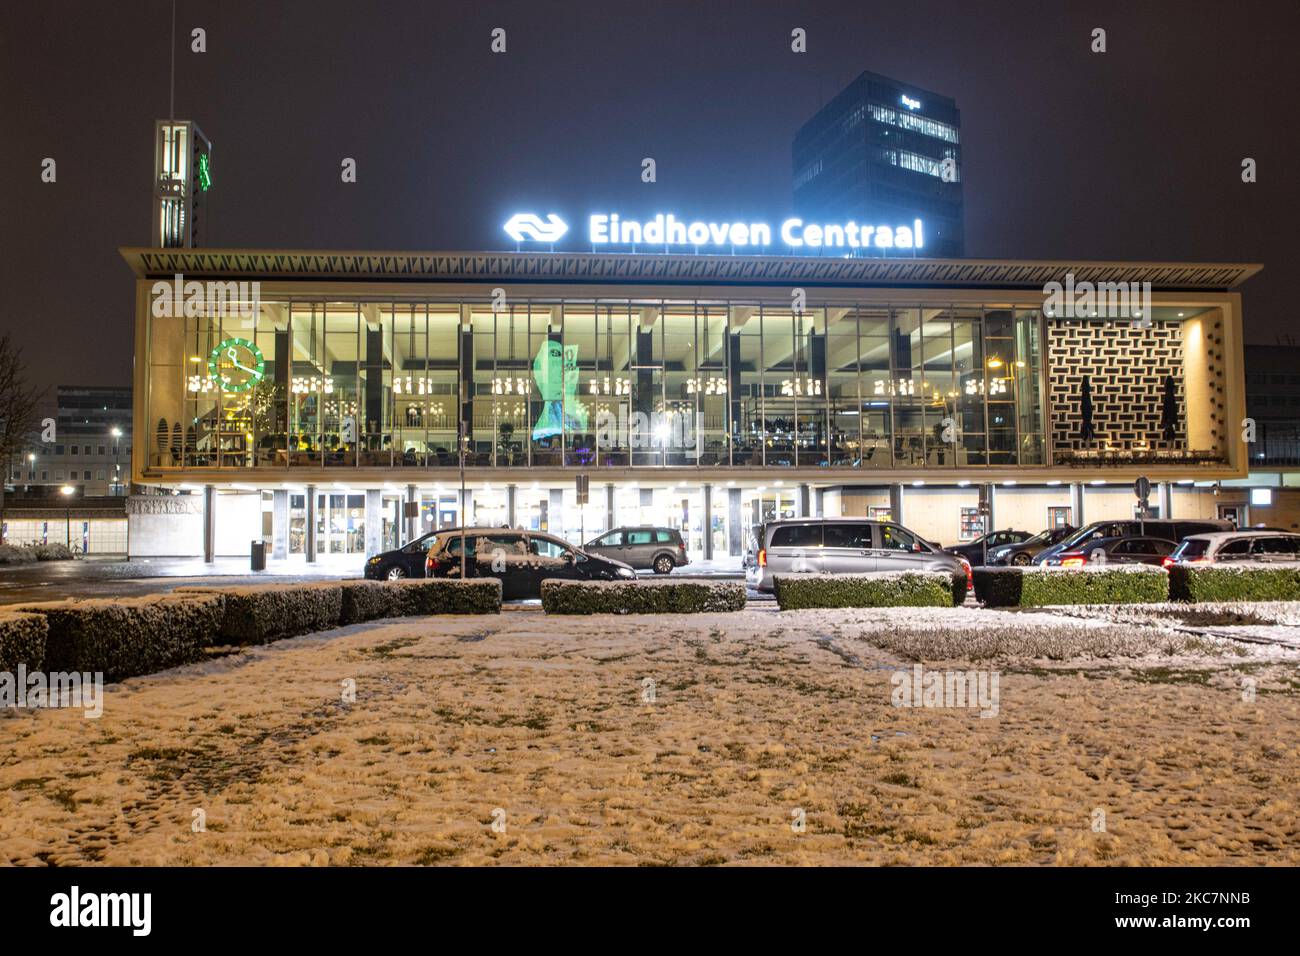 Eindhoven Centraal, the centra train station of the city with the inscription on top of it and the statue of Philips in front of the building as seen during the snowfall. Night long exposure photography images of snow-covered and illuminated with city lights Eindhoven city center after the snowfall. Daily life in the Netherlands with the first snowfall of the year covering almost everything the cold weather shows subzero temperature. The chilly condition with snow and ice changed soon according to the forecast, the freezing condition will not last more than a day. Eindhoven, the Netherlands on Stock Photo